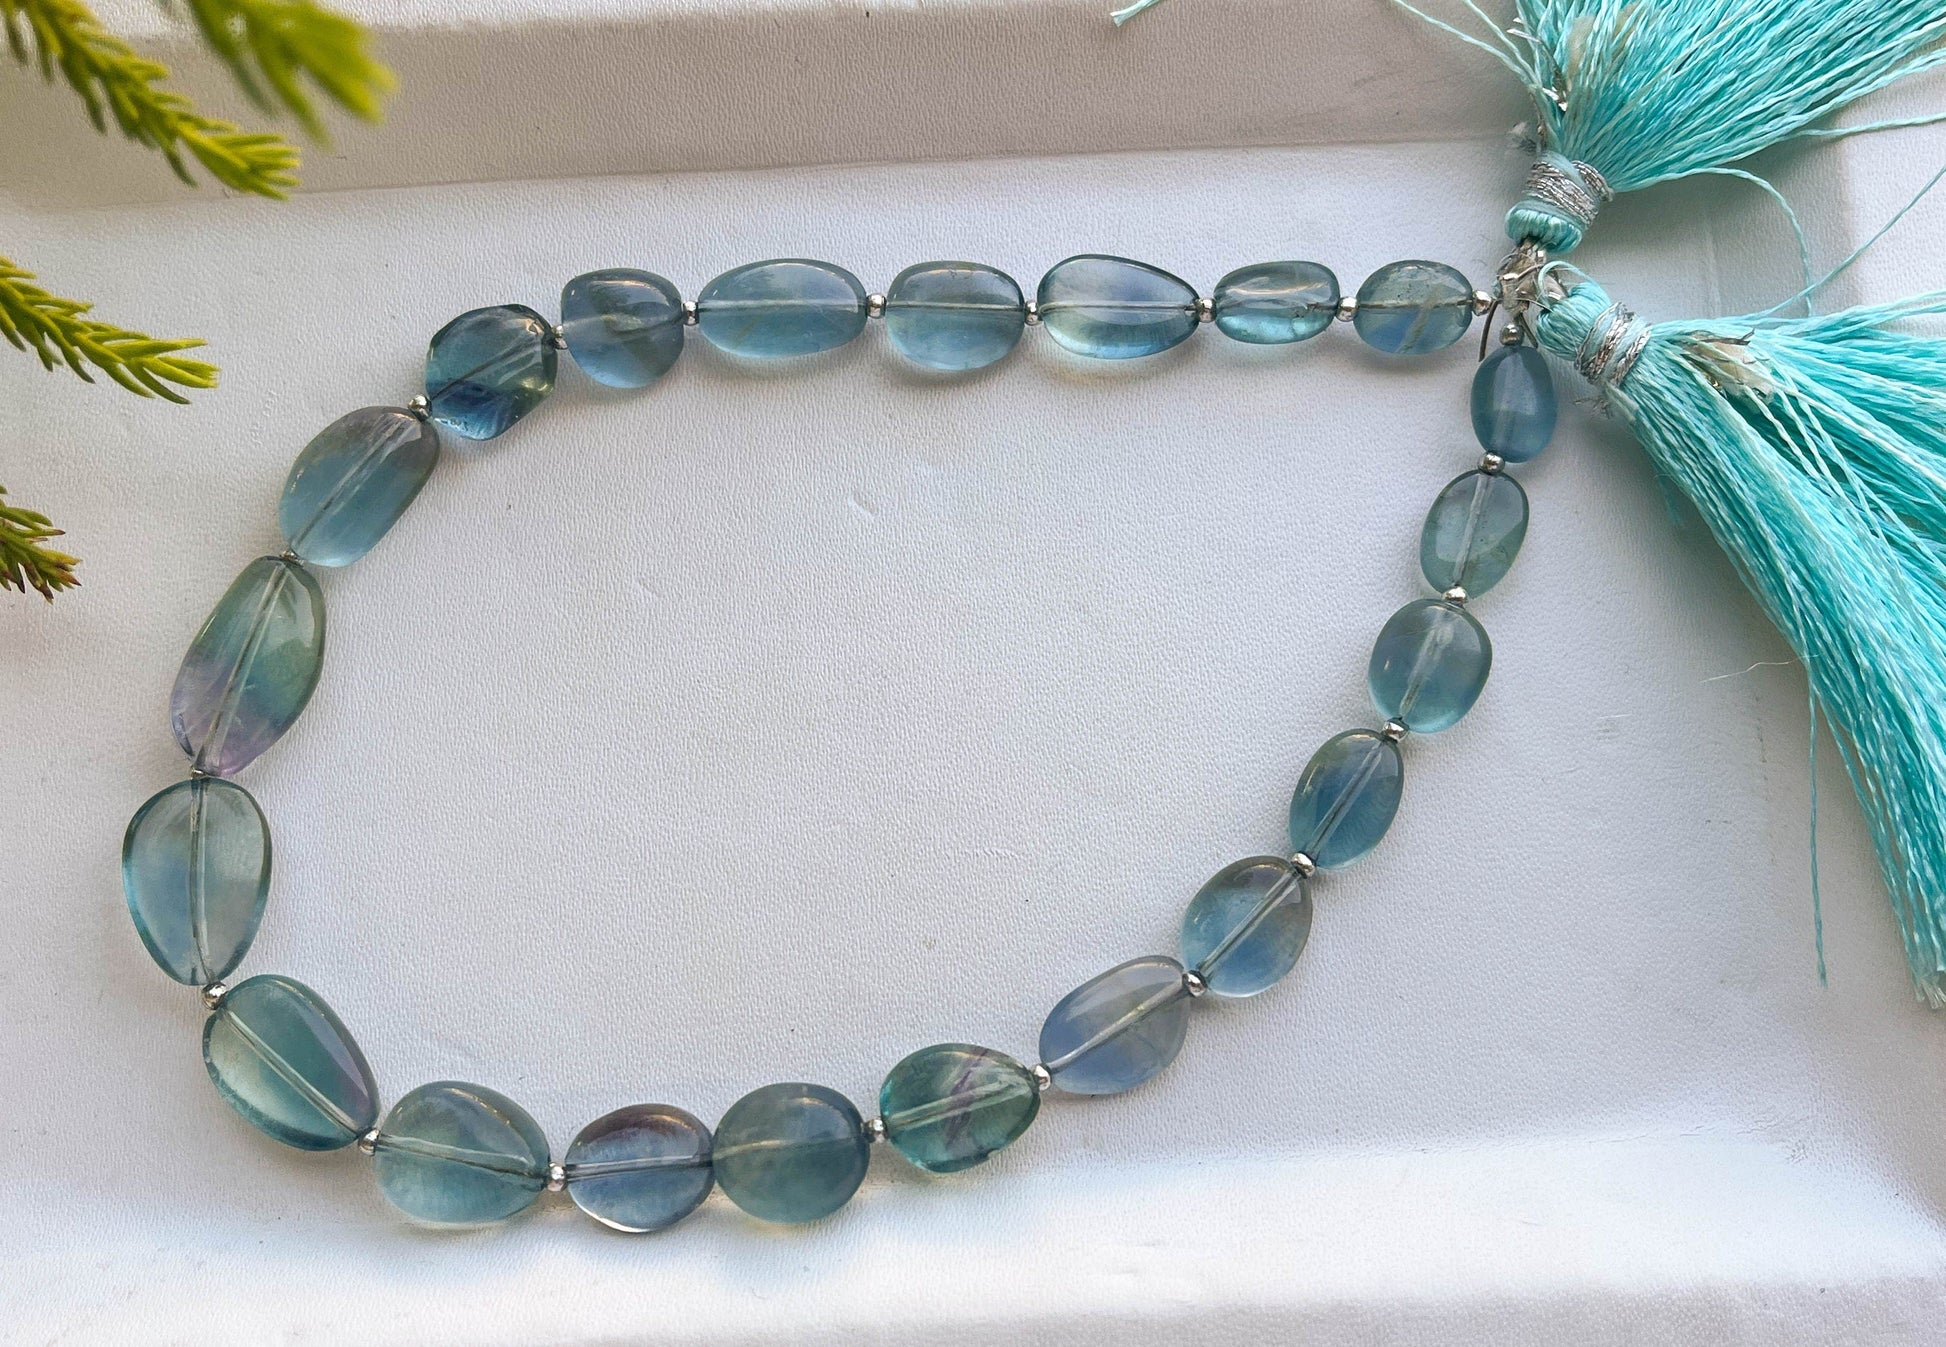 Teal Blue Fluorite Smooth Tumble Beads, Natural Fluorite Gemstone Beads, Fluorite Beads, 9 inch, 21 Pieces, Beadsforyourjewellery BFYJ74-3 Beadsforyourjewelry